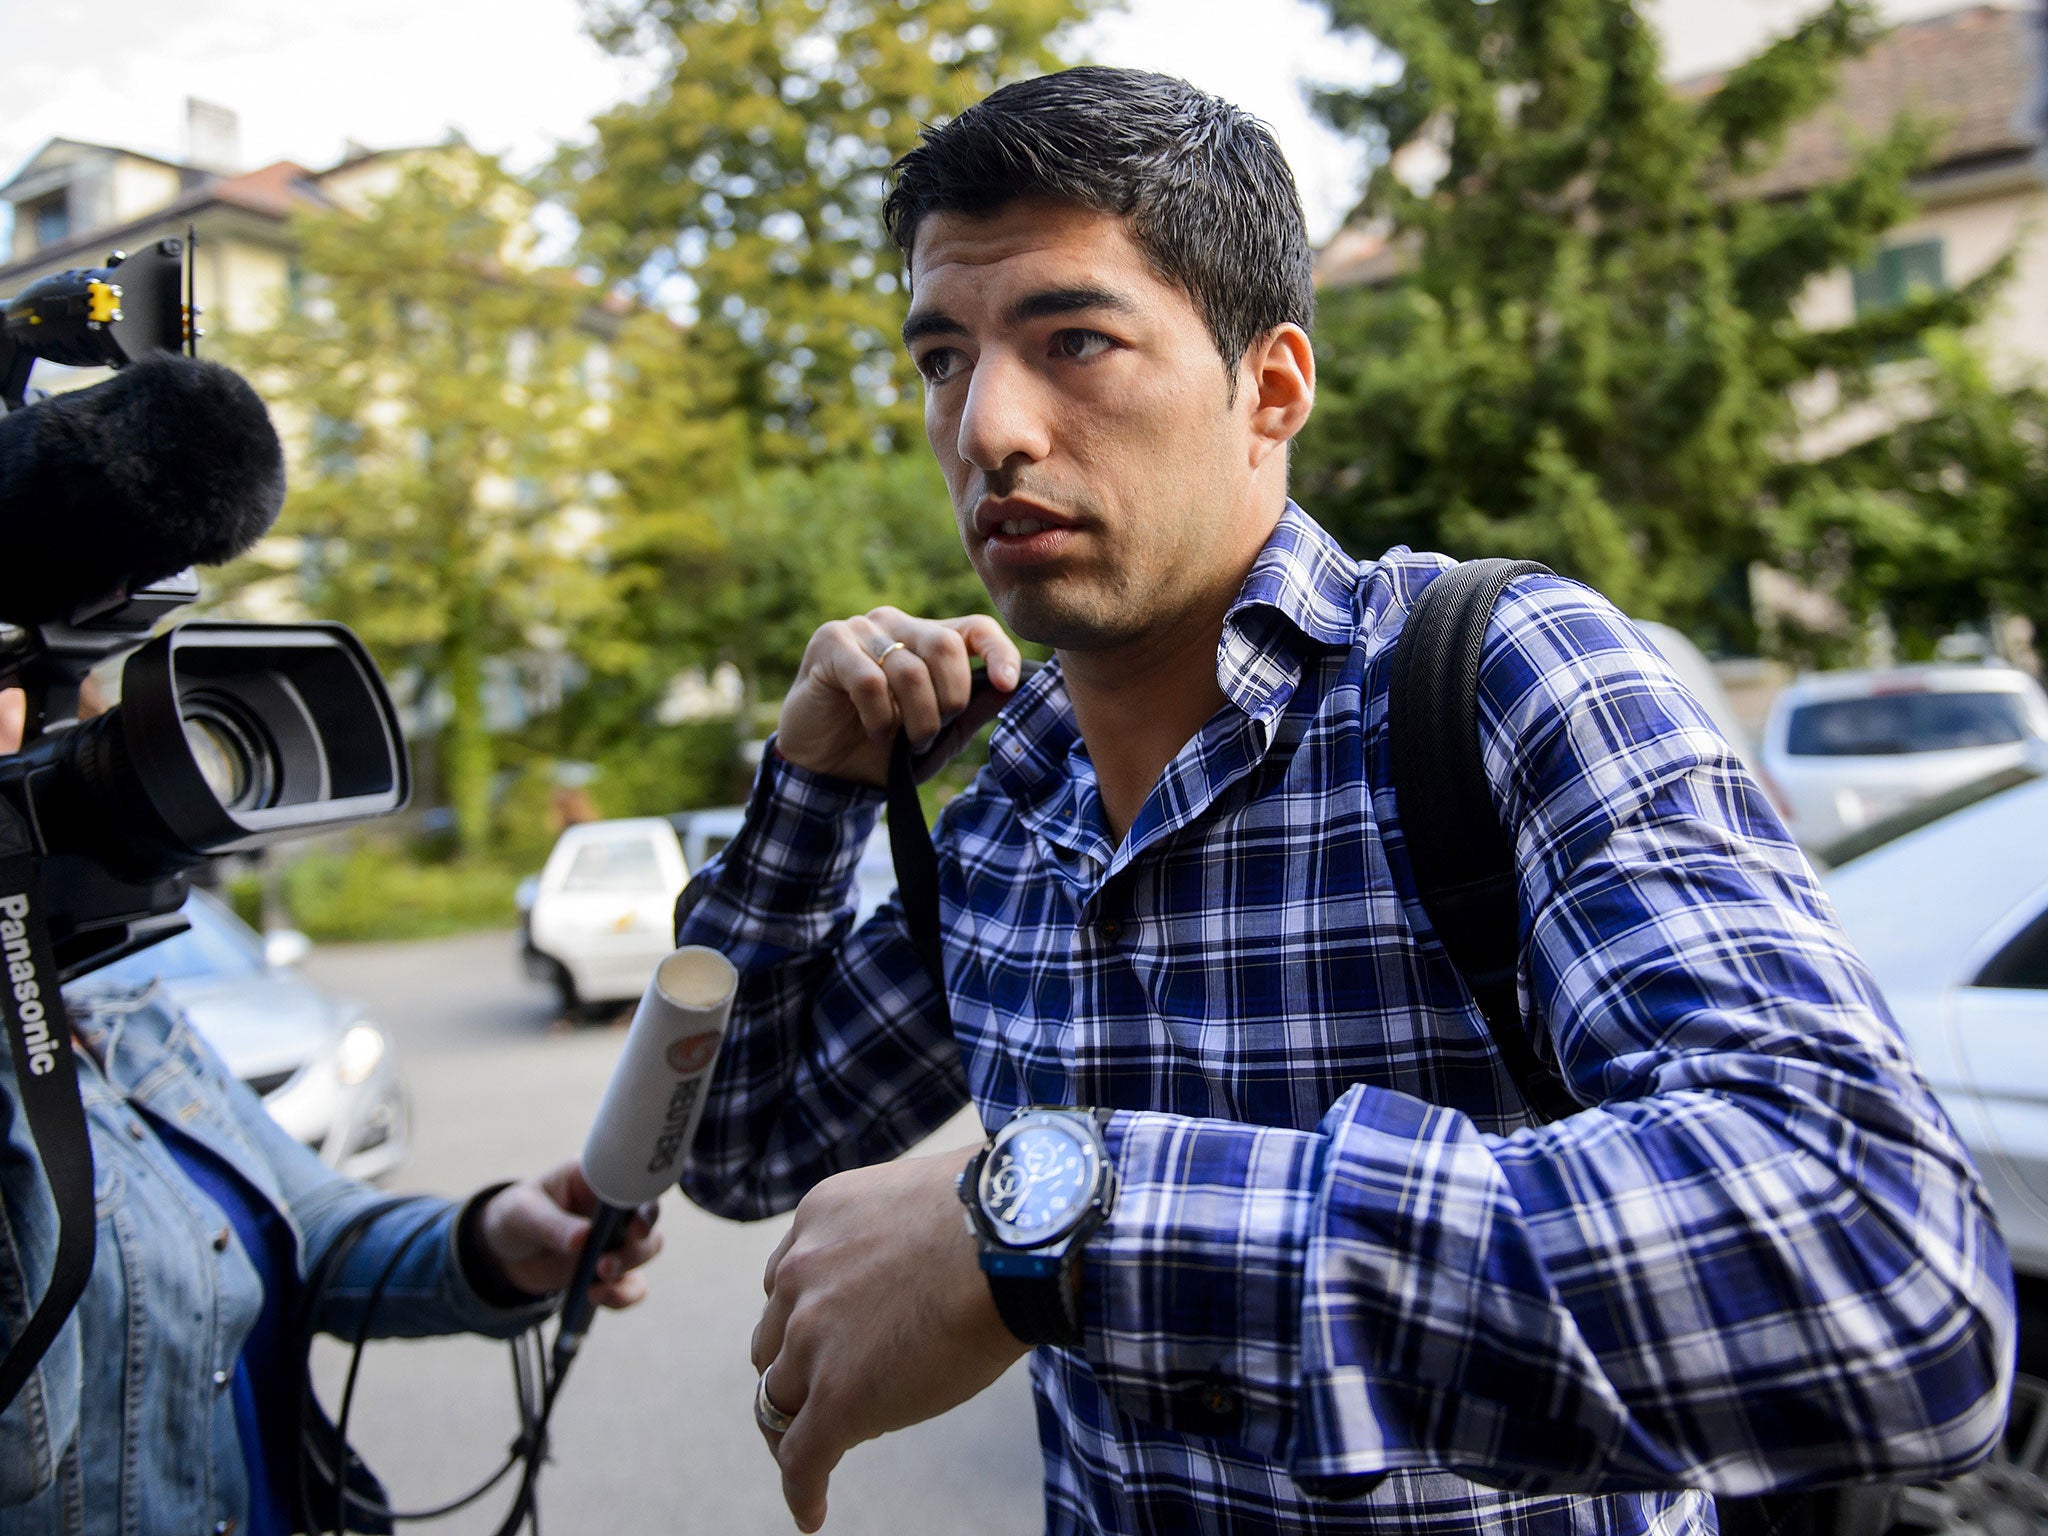 Luis Suarez's ban has been upheld by the Court of Arbitration of Sport (CAS)